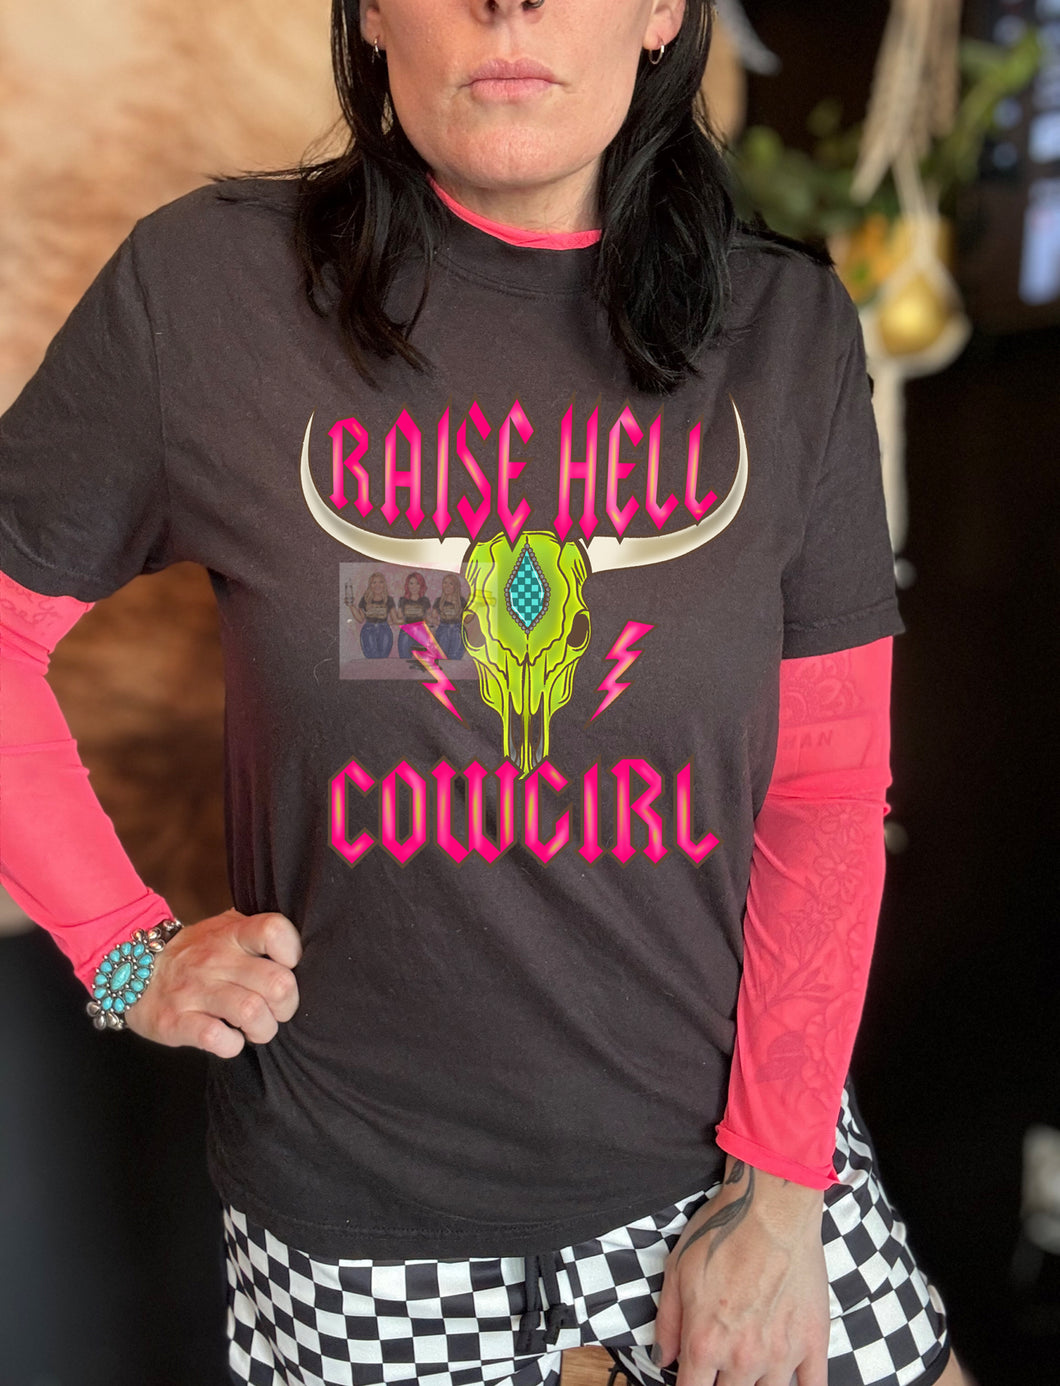 Raise Hell Cowgirl bullskull graphic tee // neon pink mesh long sleeve // checkered shorts sold separately - Mavictoria Designs Hot Press Express